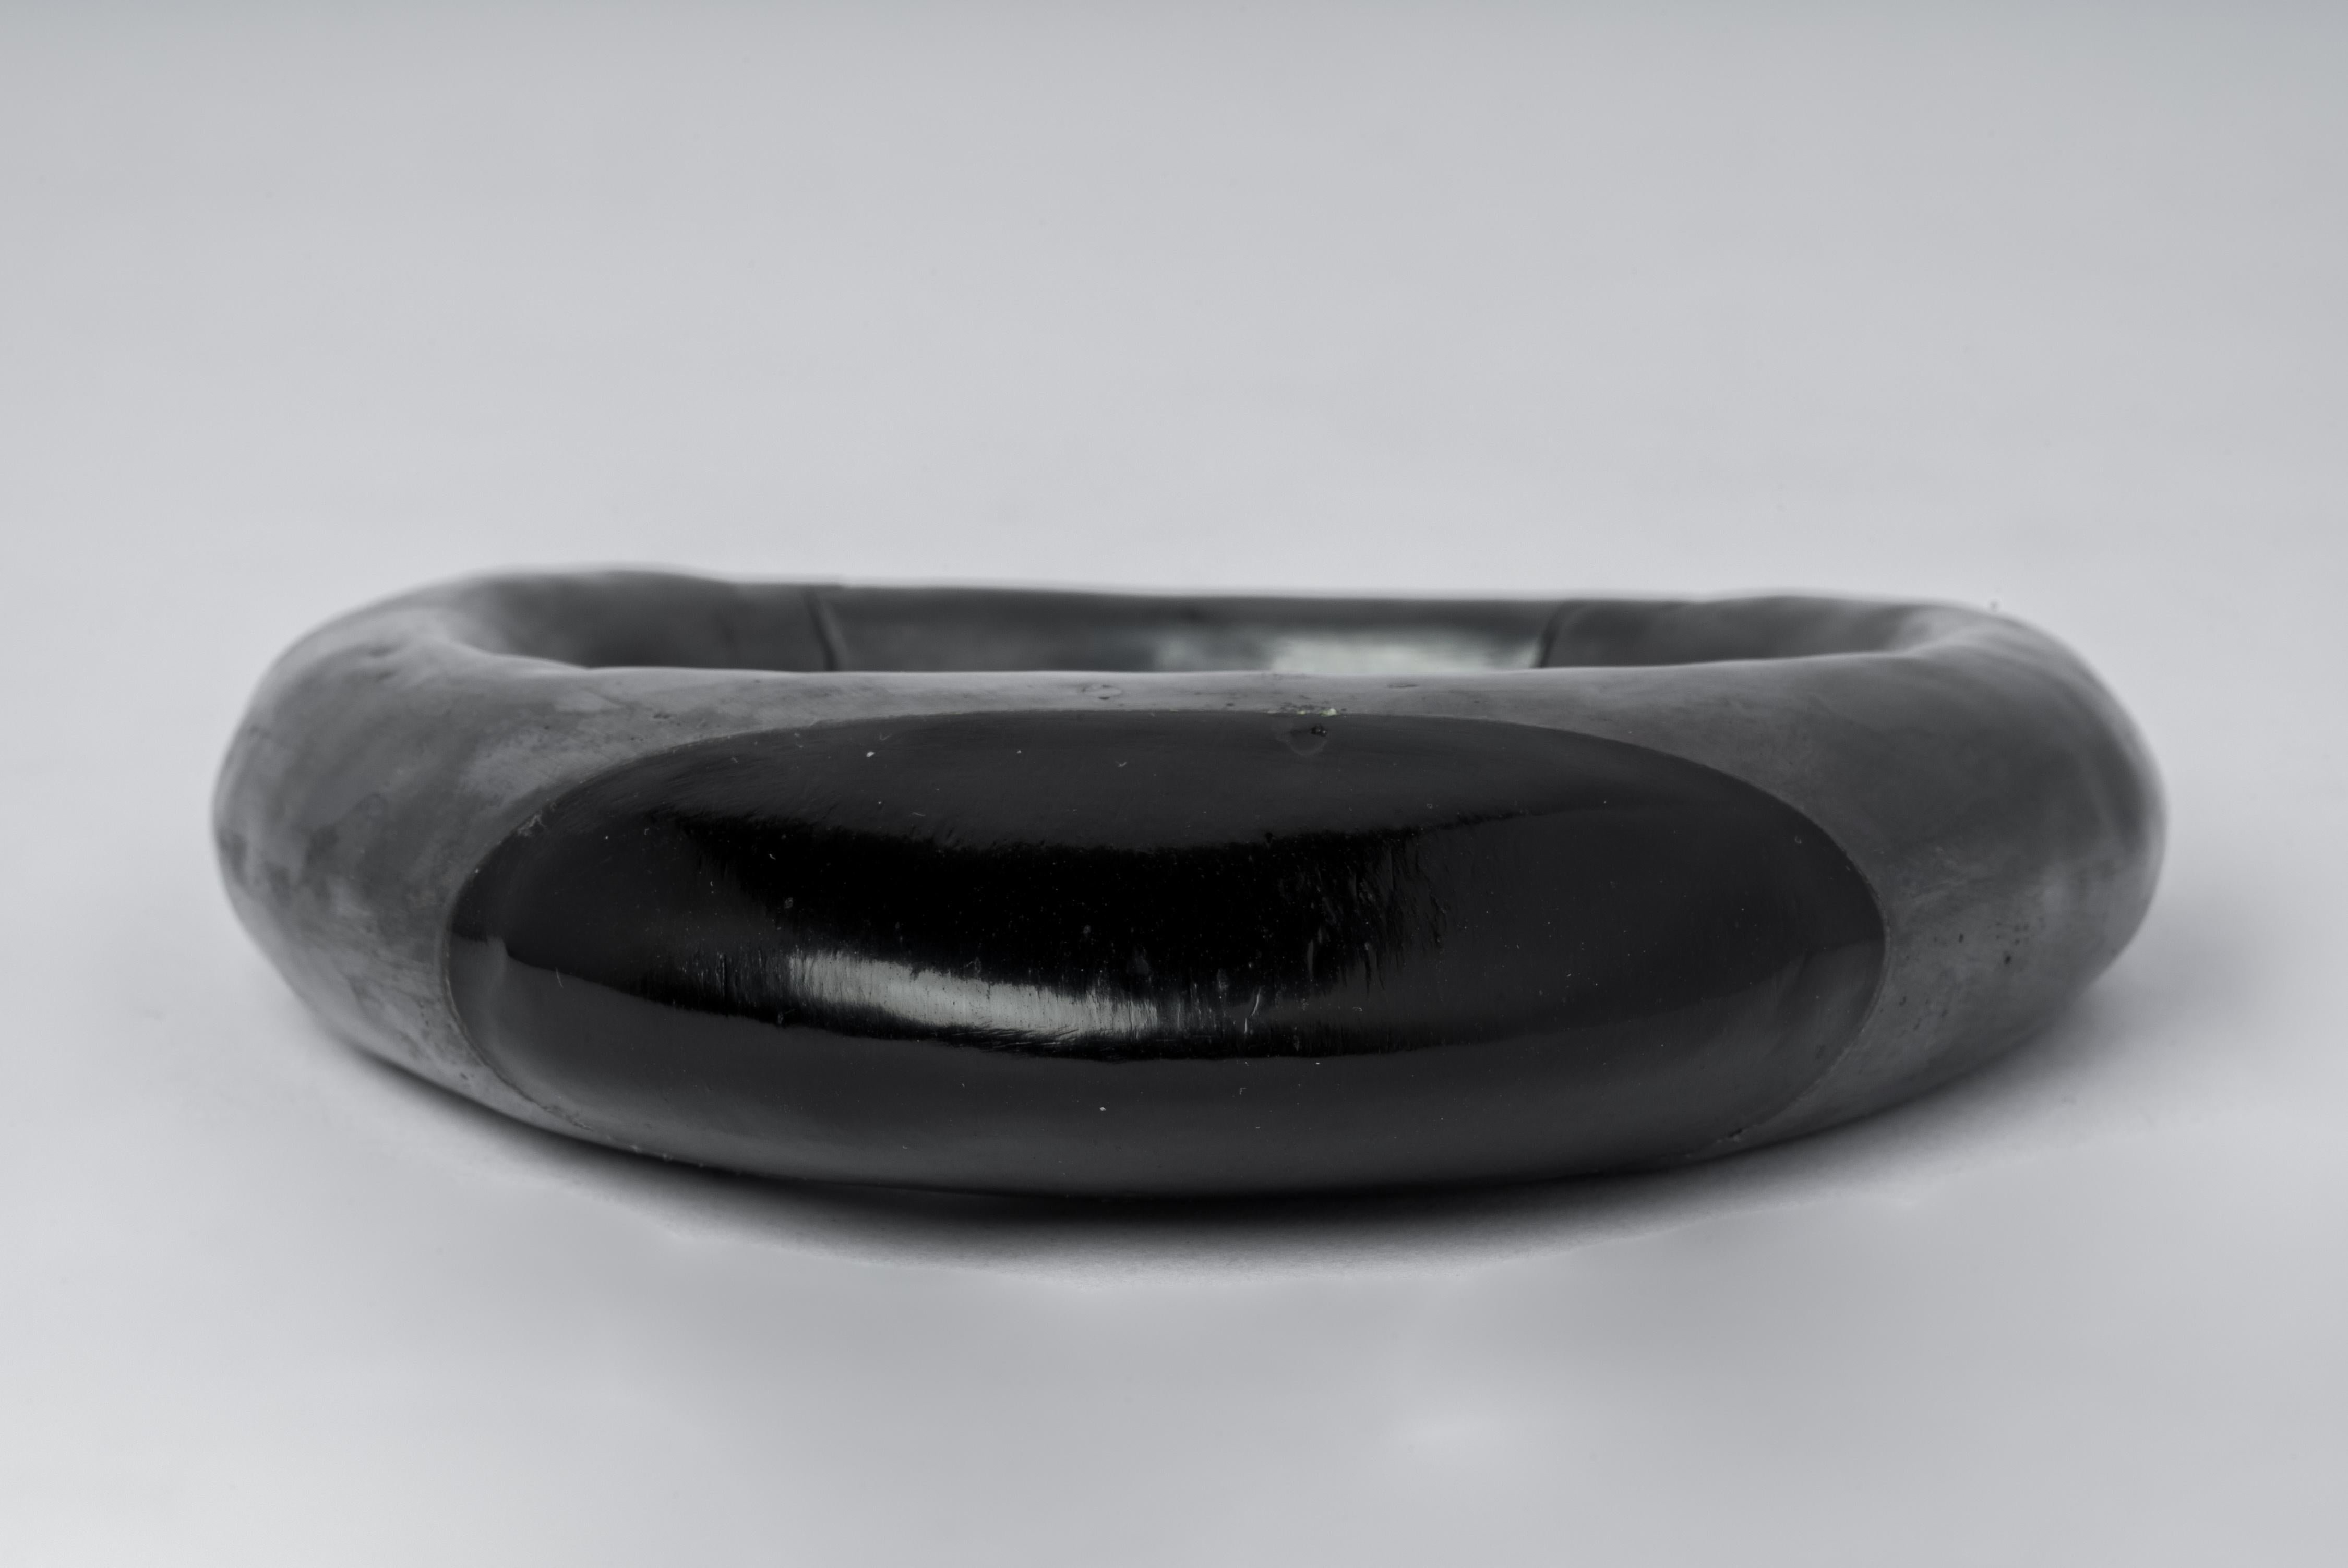 Bracelet in oxidized sterling silver and slab of JET, a fossilized coal. This item has elements that have been carved entirely by hand. This piece is 100% hand fabricated from metal plate; cut into sections and soldered together to make the hollow